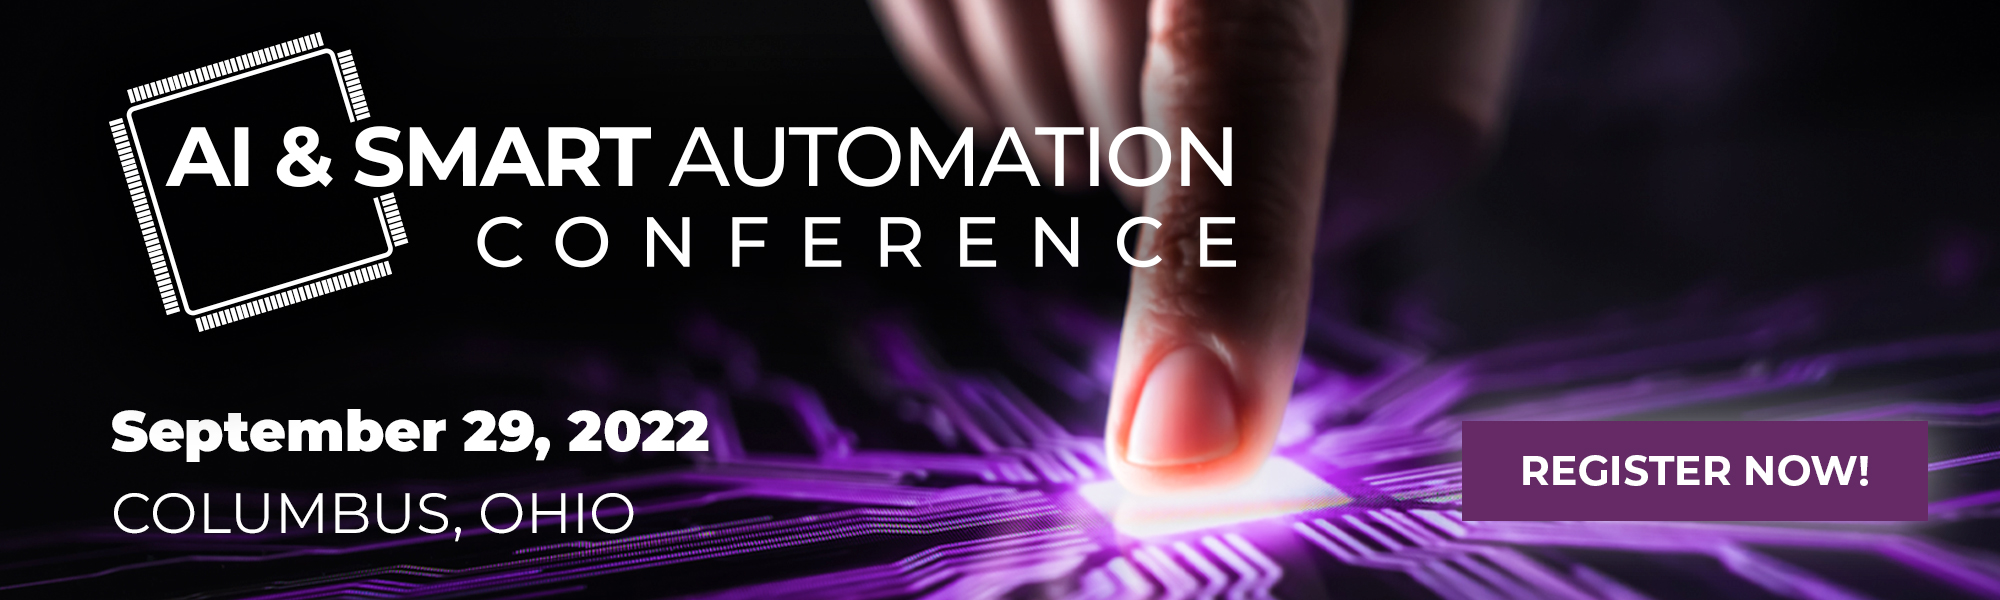 AI & Smart Automation Conference - 09/29/2022 - Columbus, OH